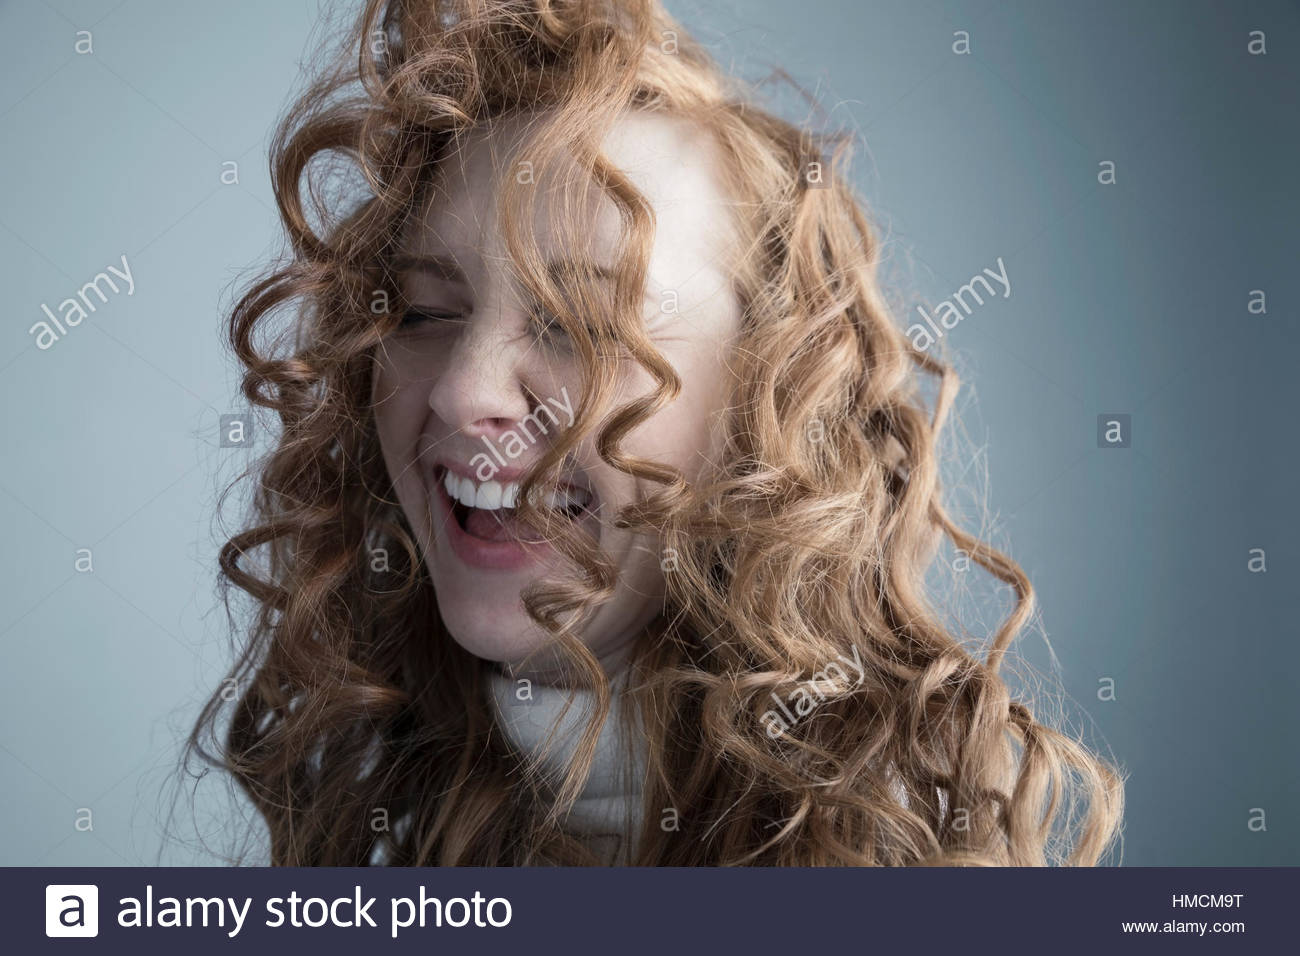 Portrait playful Caucasian woman with messy red curly hair in face Stock Photo